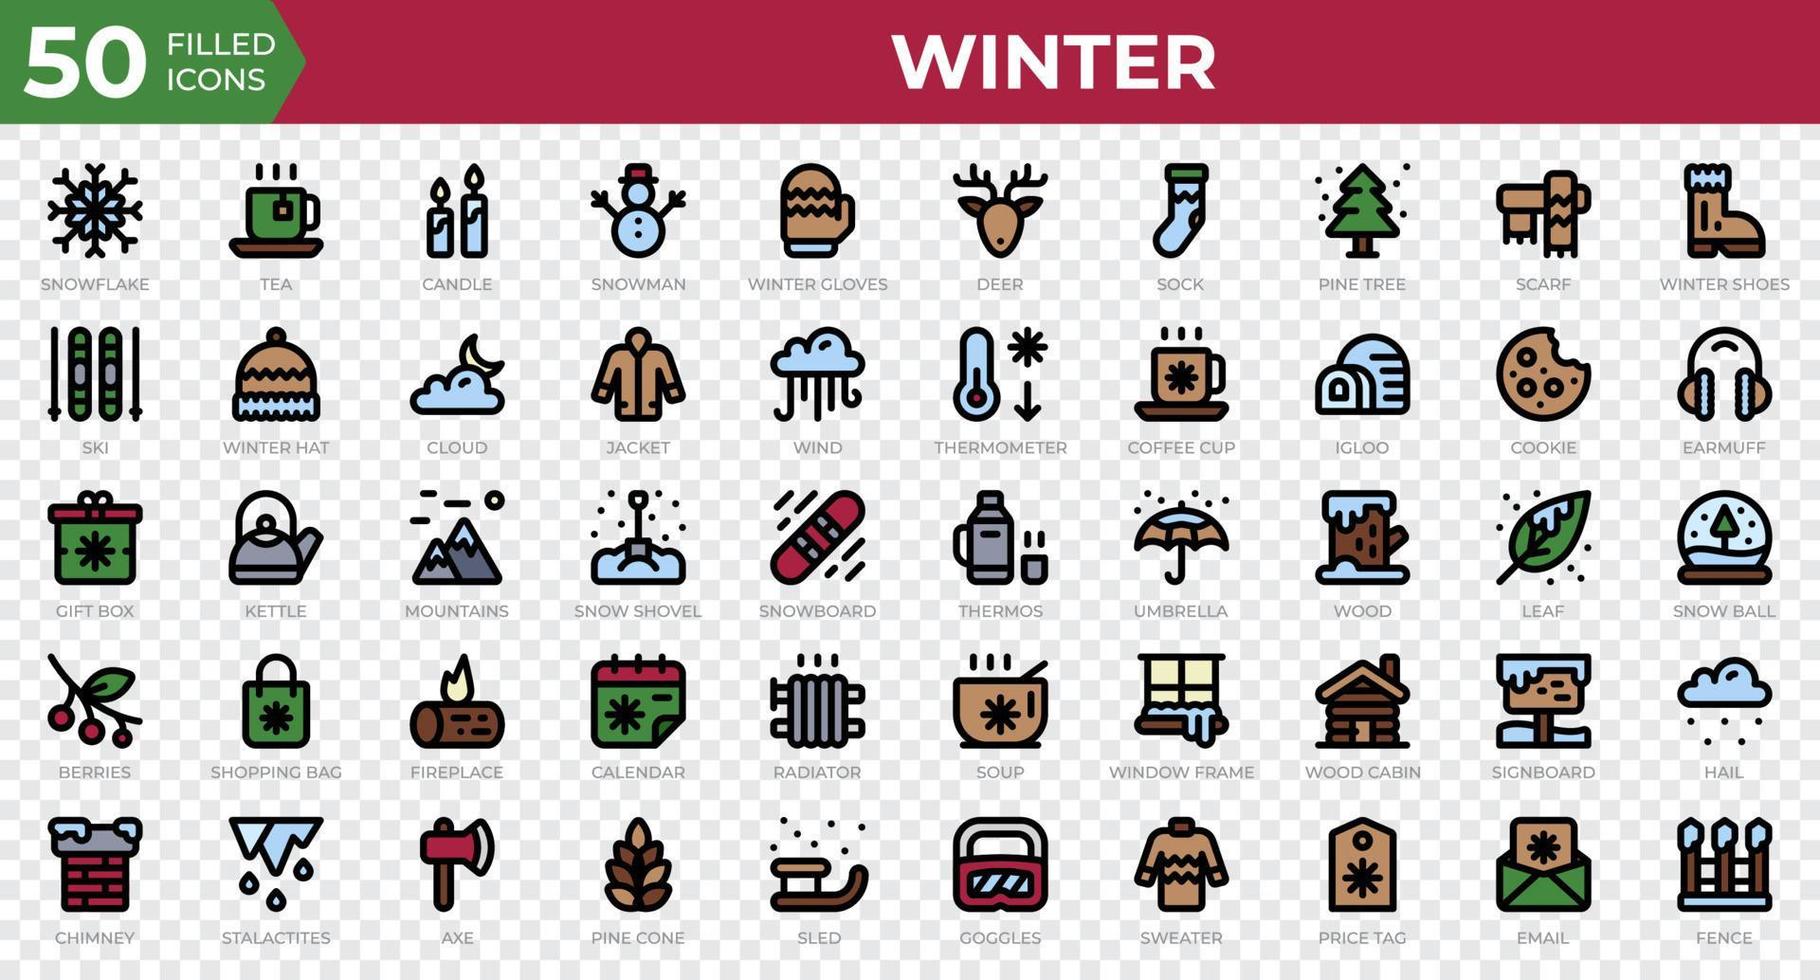 Winter icons in filled outline style. Snowflake, tea, sweater. Filled outline icons collection. Holiday symbol. Vector illustration